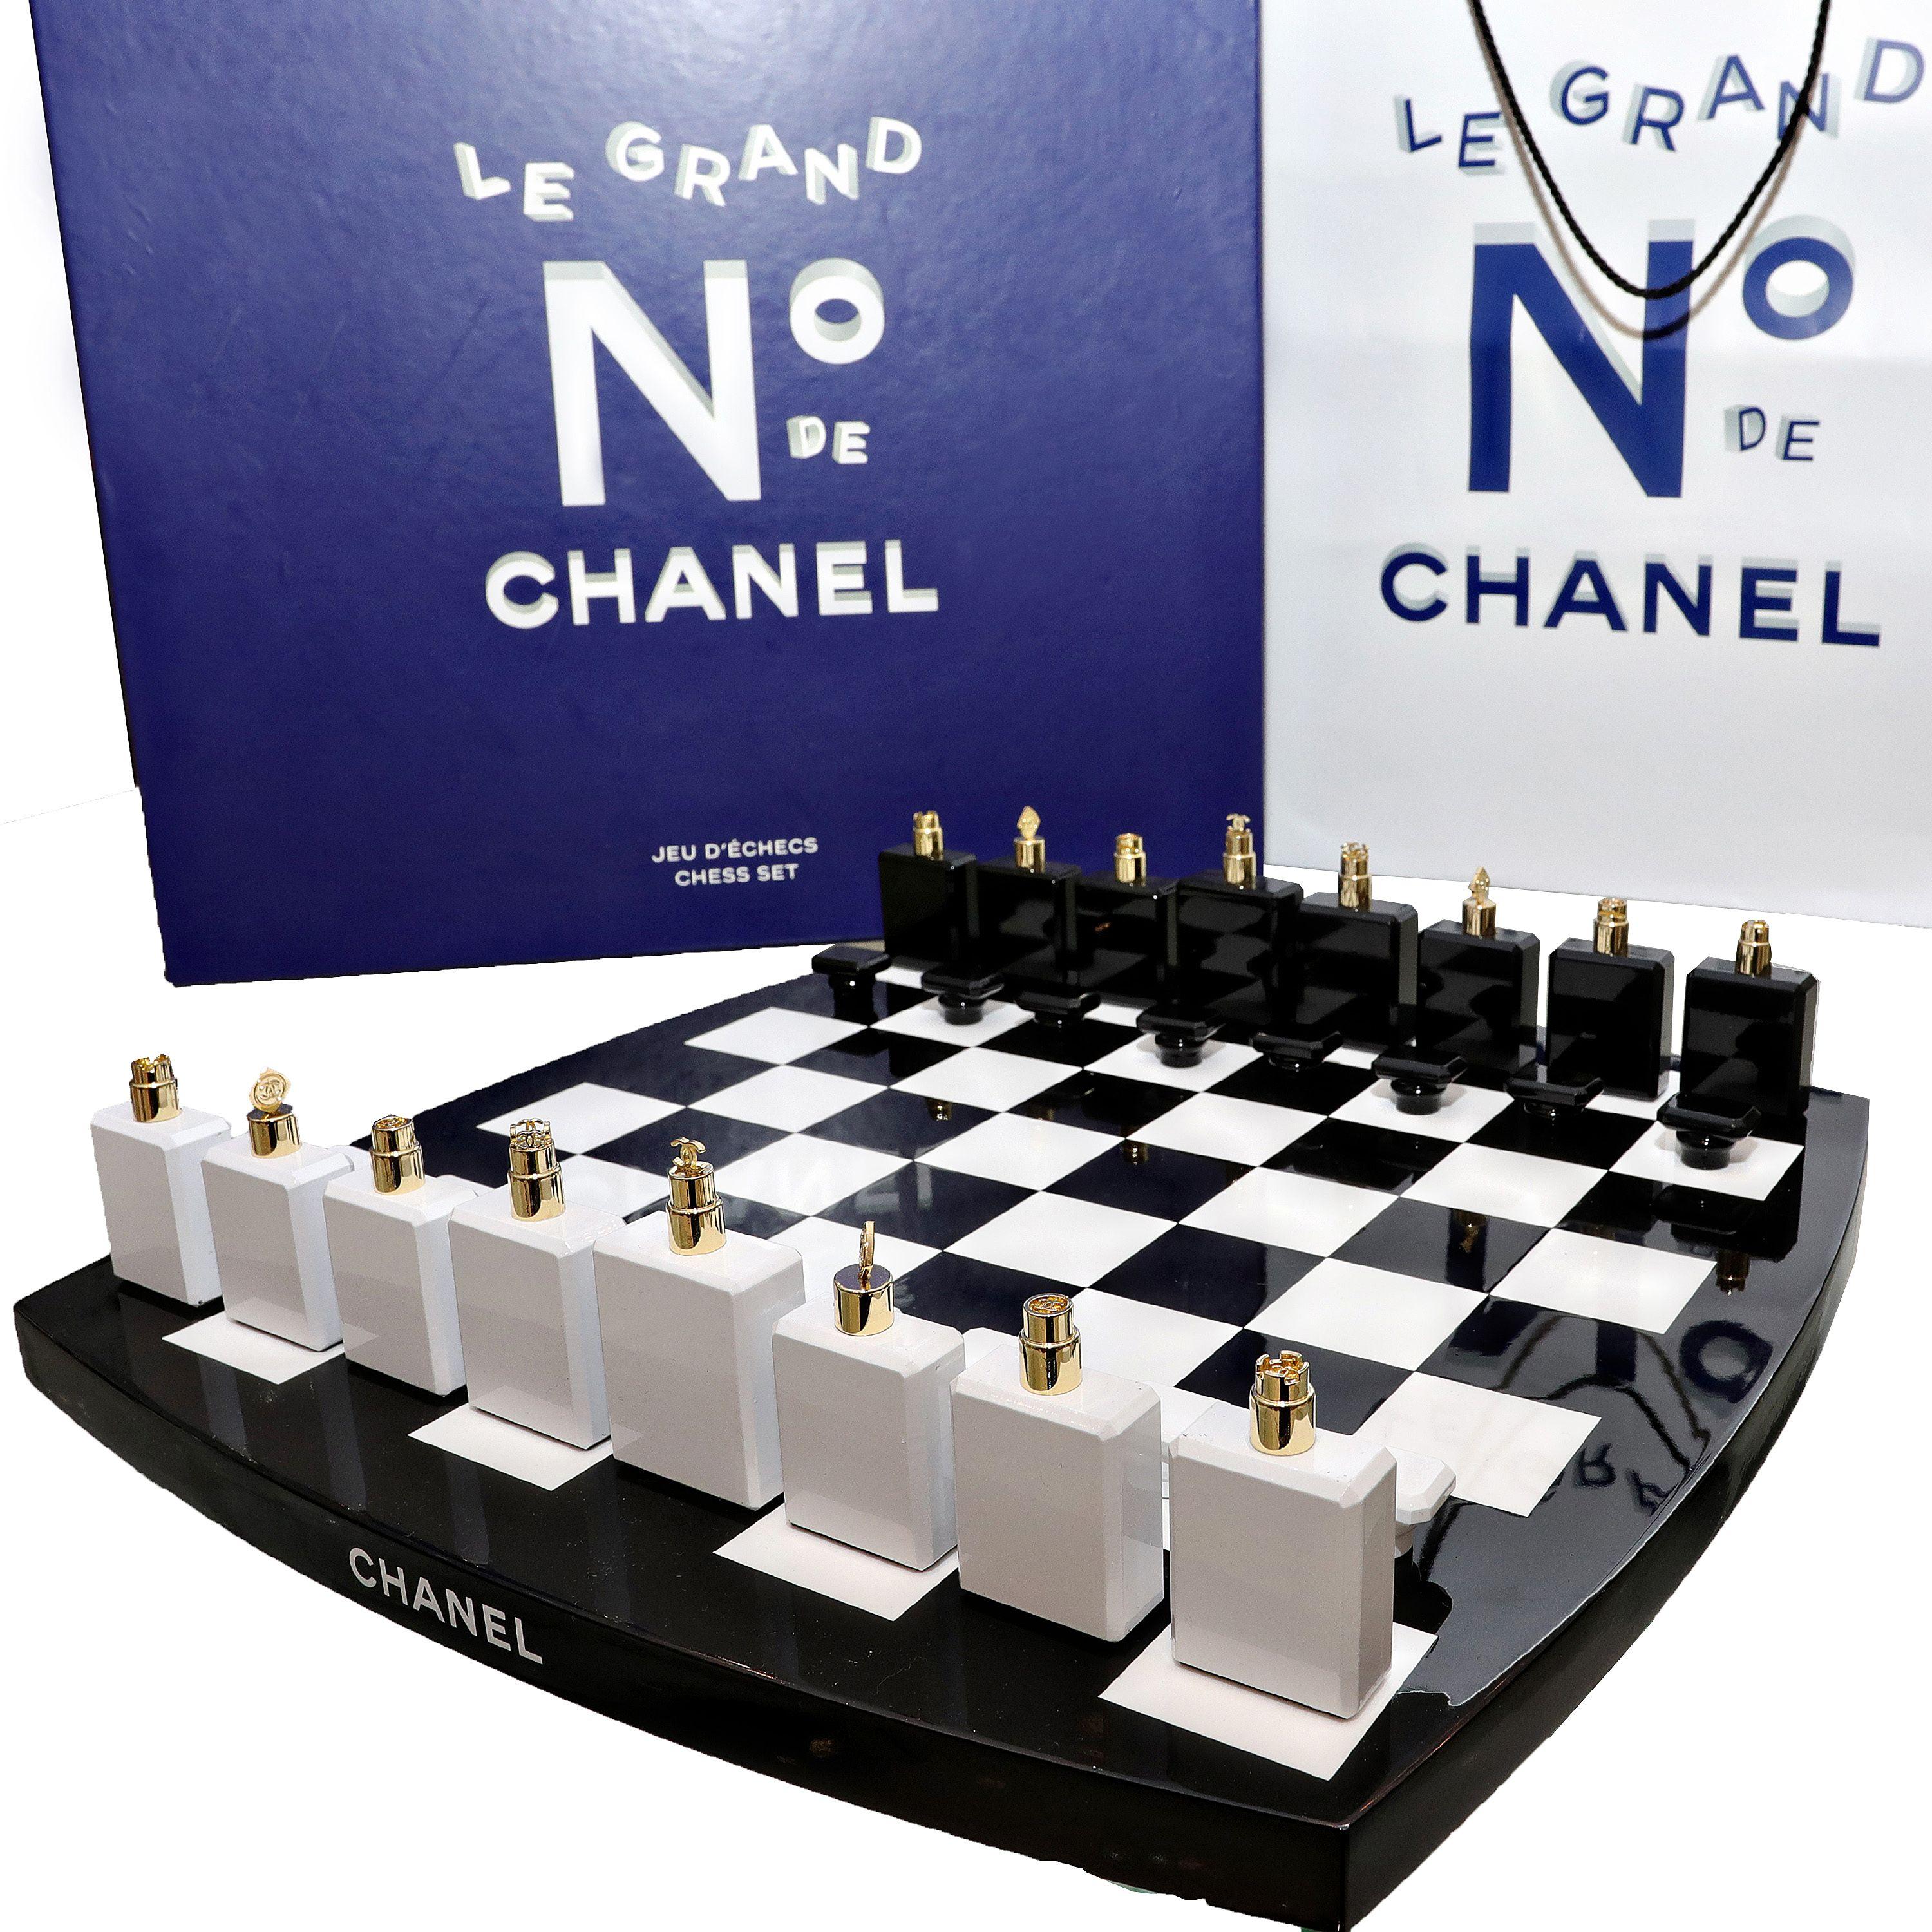 This authentic Chanel Limited Edition Chess Set is in pristine condition.  A must have for any collection.  Black and white lacquered chess board with Chanel No 5 perfume bottles acting as the chess pieces.  The toppers on each “bottle” indicate the